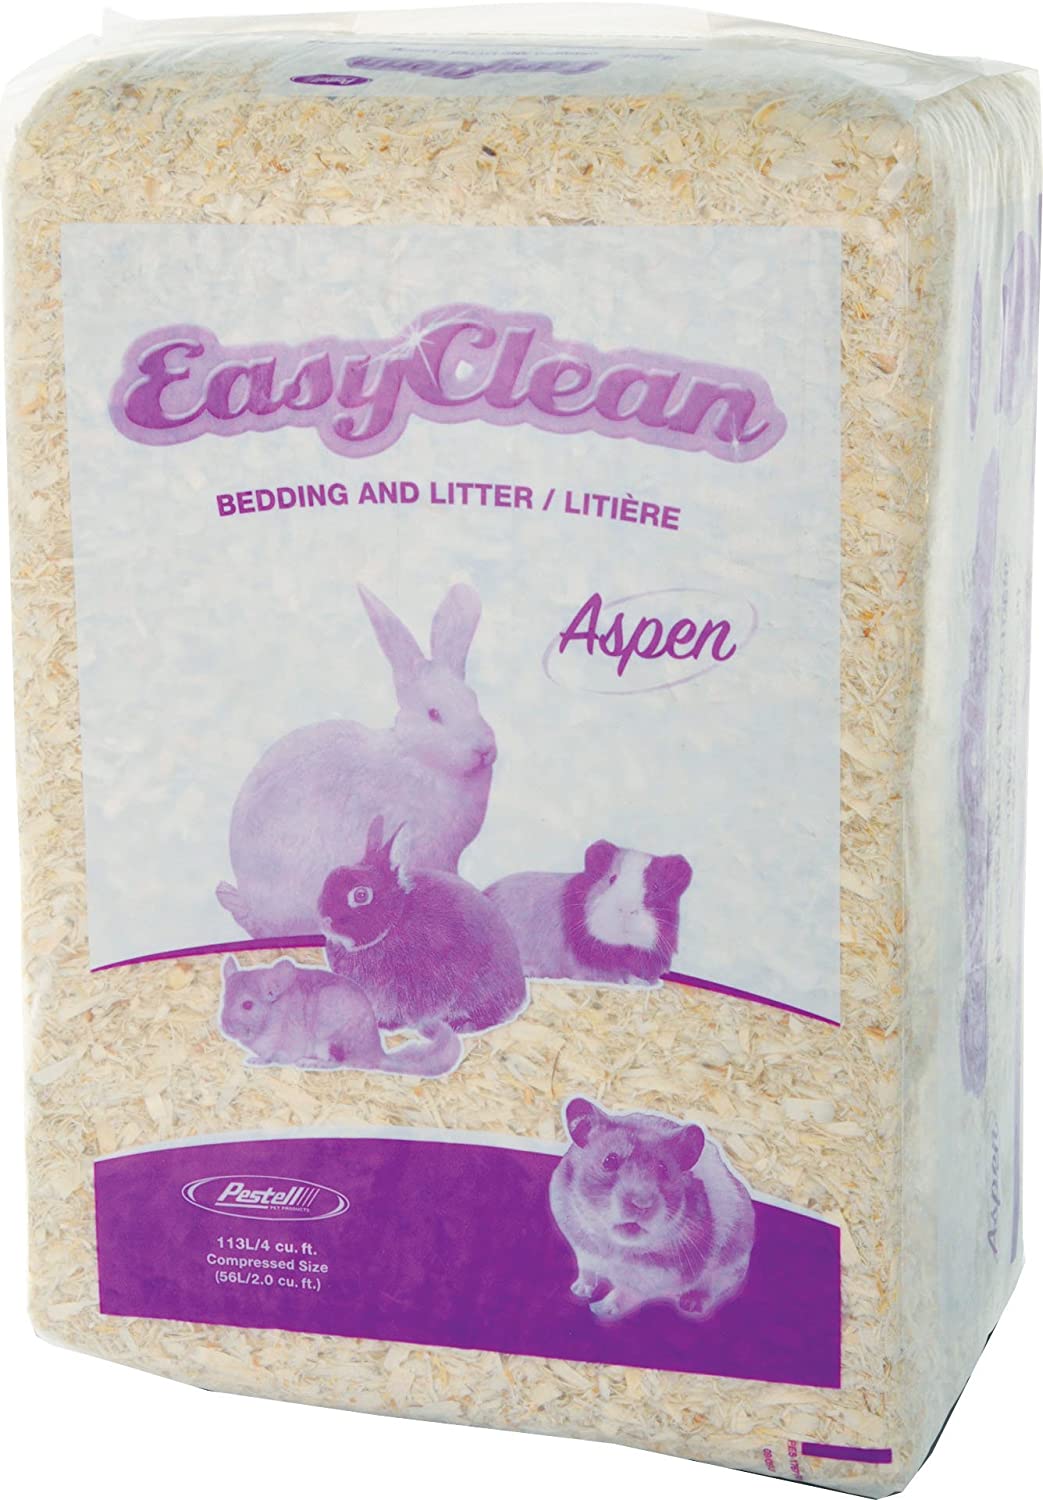 Pestell Pet Products Easy Clean Aspen Bedding, 113 Liters 9.0"L x 24.0"W x 16.0"Th - image 1 of 2